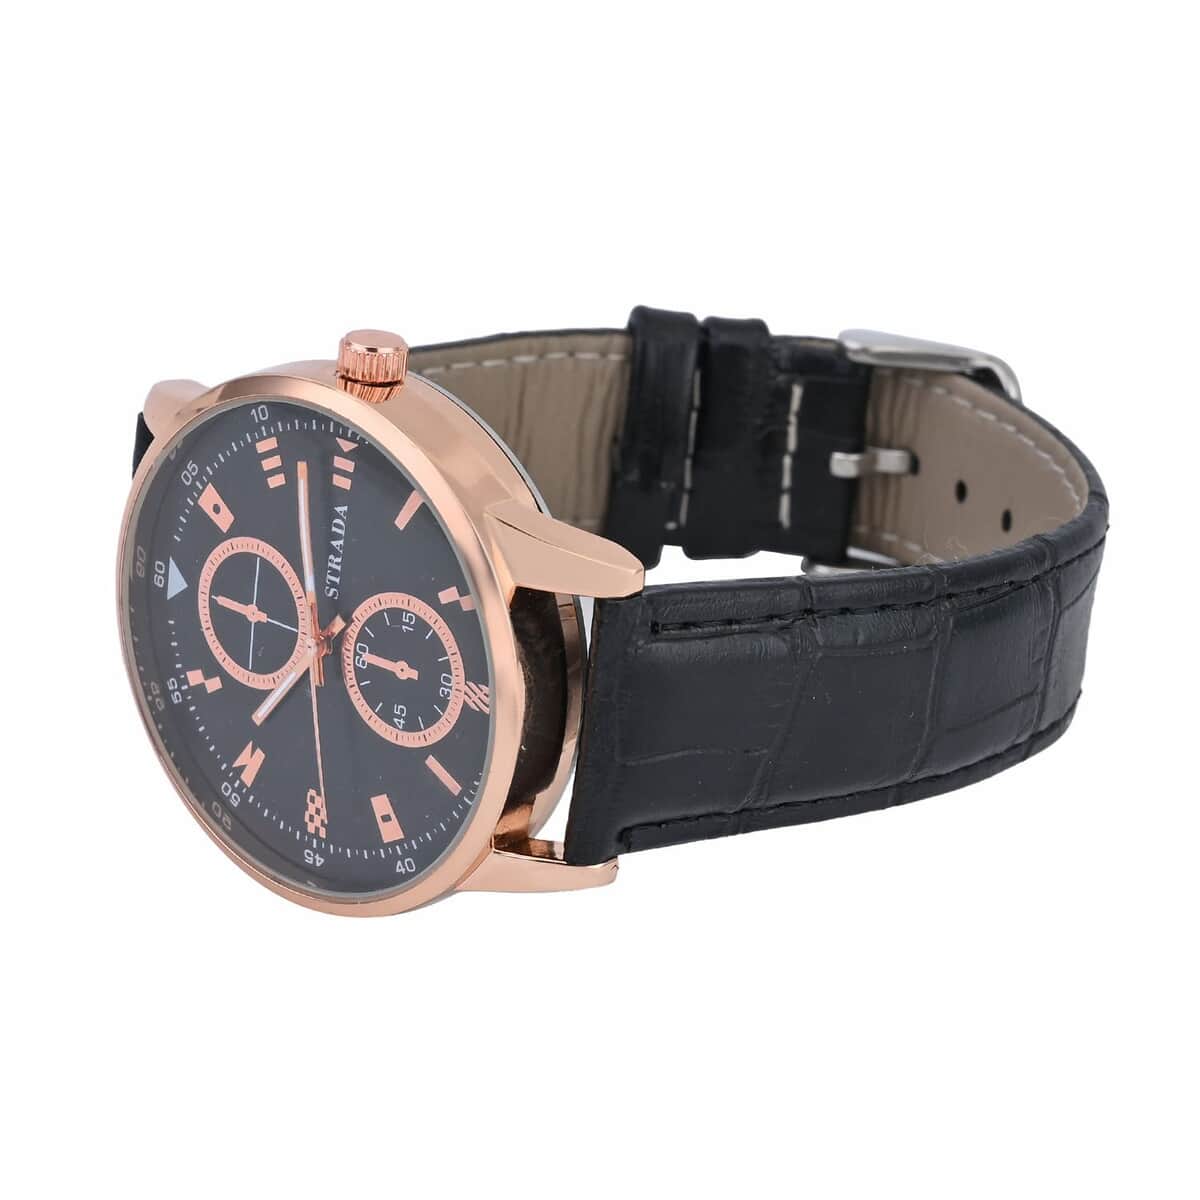 Strada Japanese Movement Watch in Rosetone with Black Faux Leather Strap (40.65mm) (5.75-7.75 Inches) image number 4